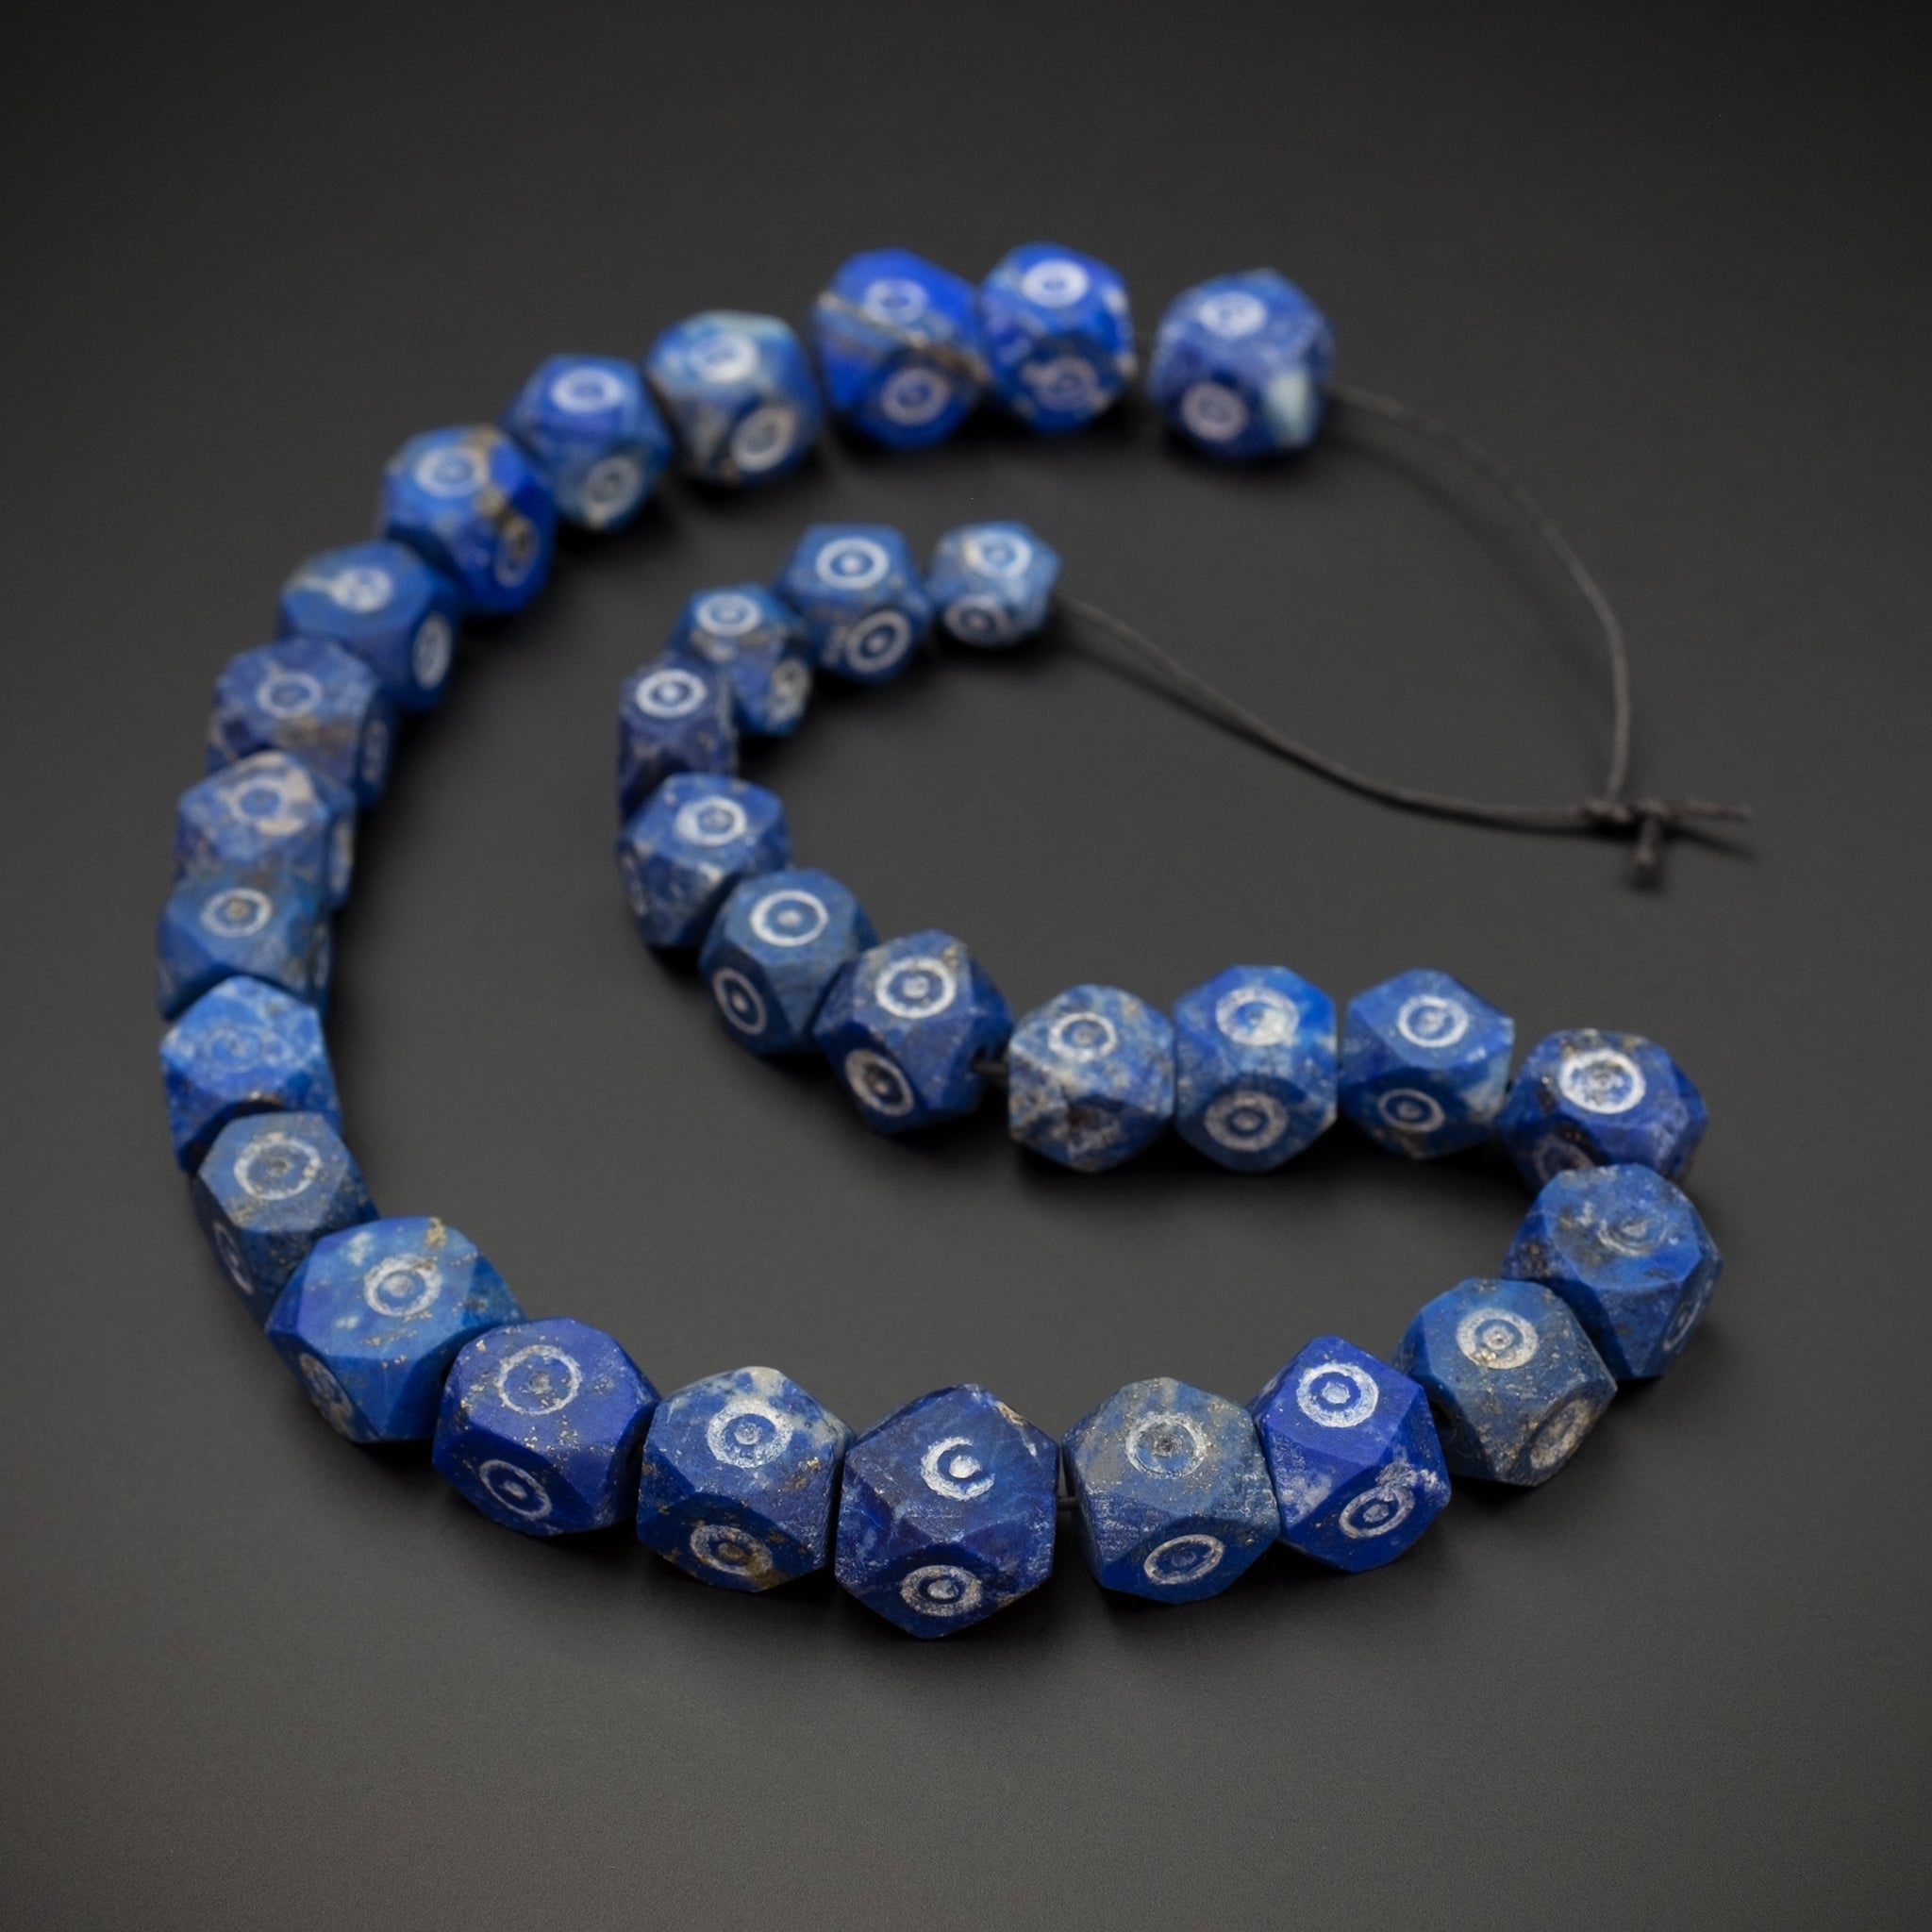 Strand of 31 Faceted Lapis Lazuli Hex Beads, Afghanistan